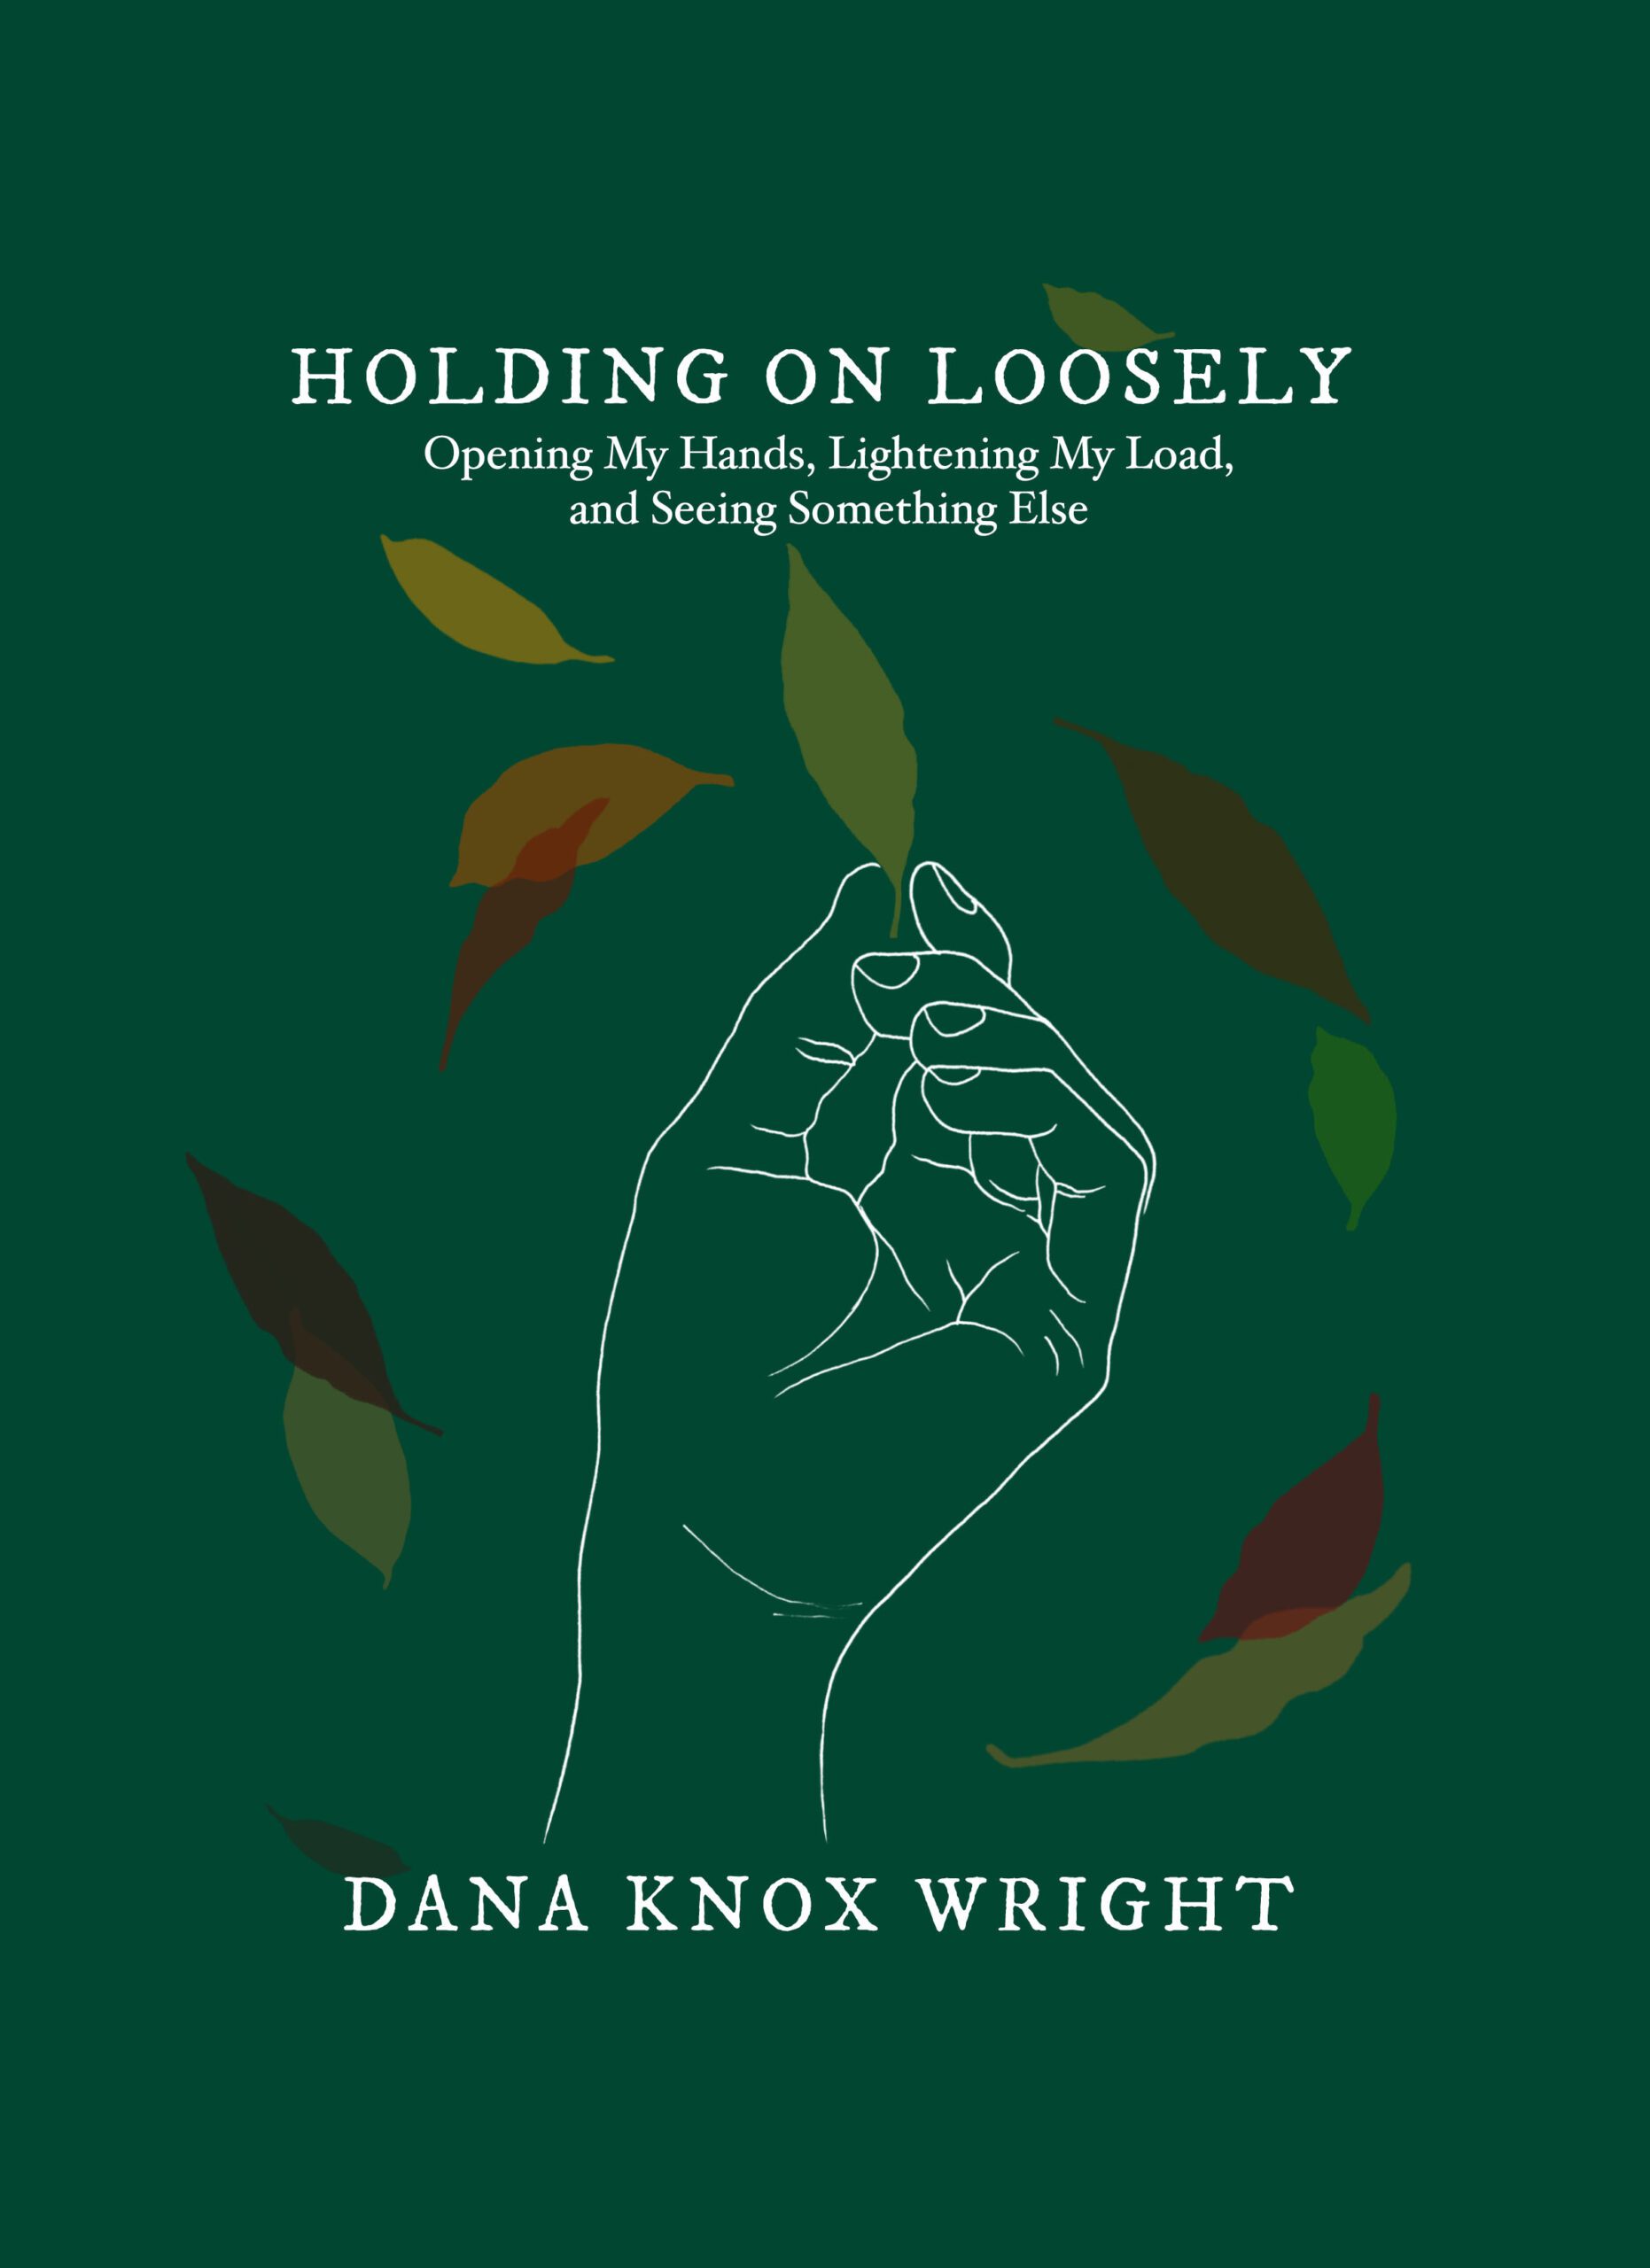 holding-on-loosely-dana-knox-wright-book-publicity-dallas